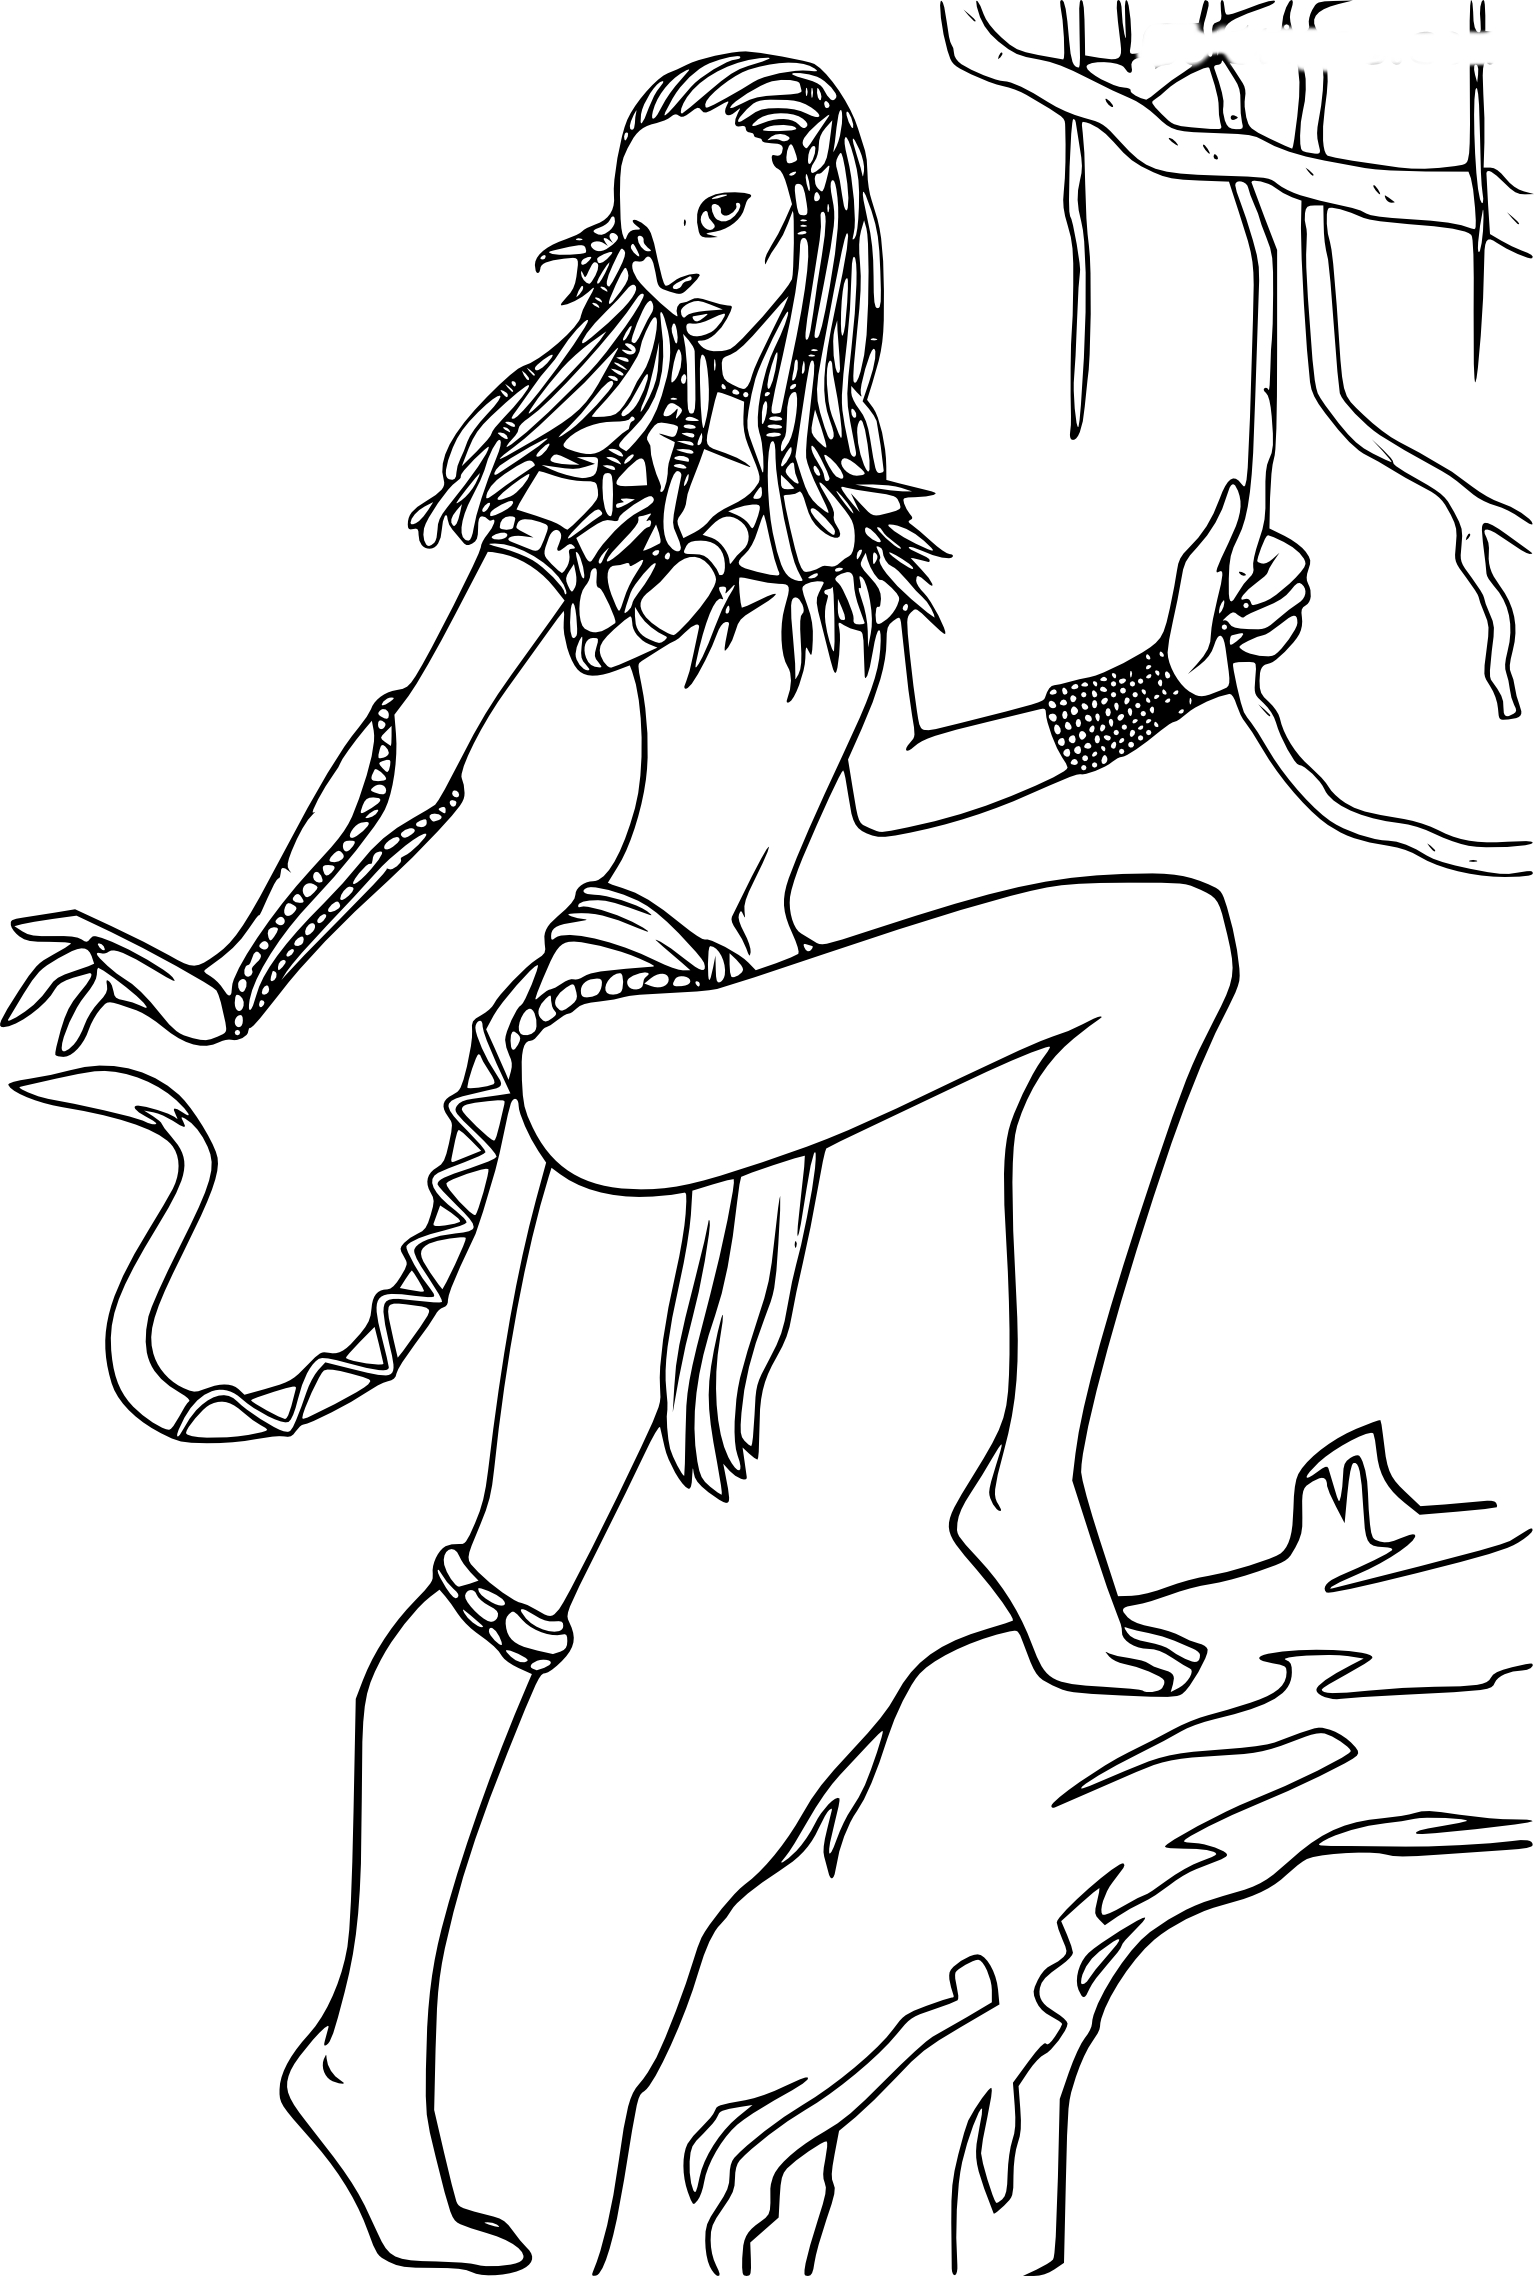 Avatar Navi coloring page